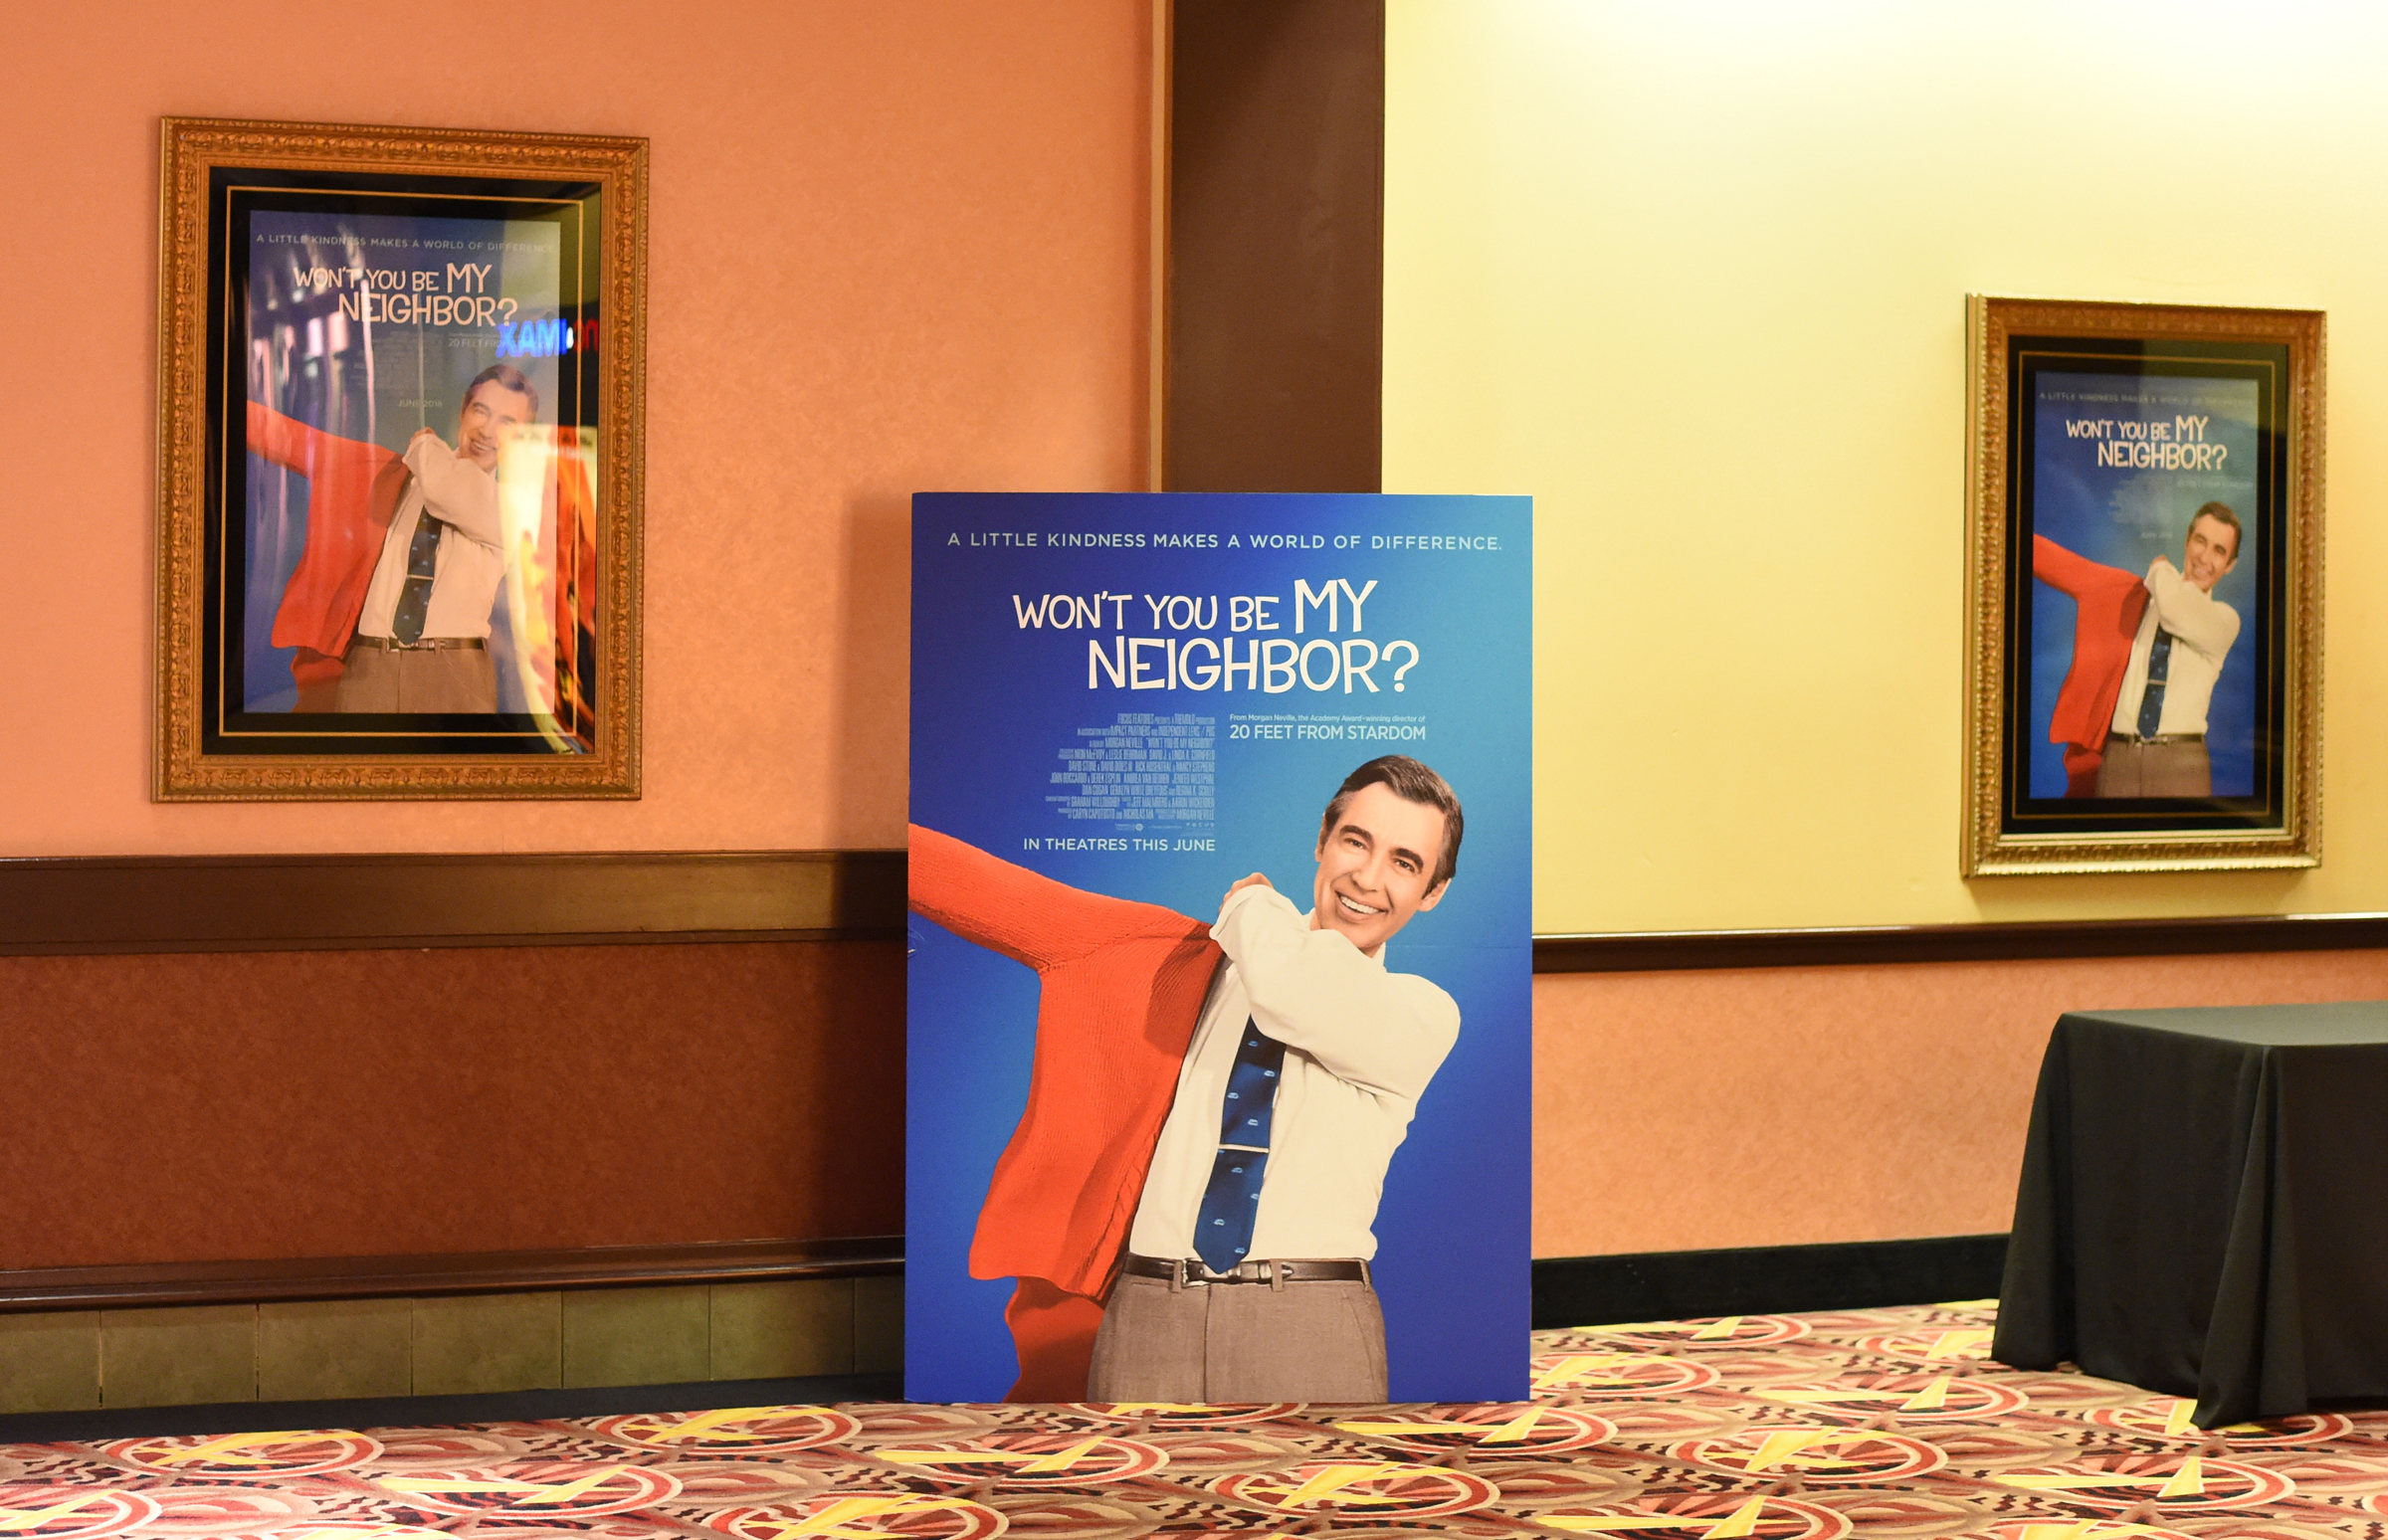 A general view of atmospher during a special screening of "Won't You Be My Neighbor?" on May 23, 2018 in West Homestead, Pennsylvania.  (Photo by Jason Merritt/Getty Images for Focus Features)